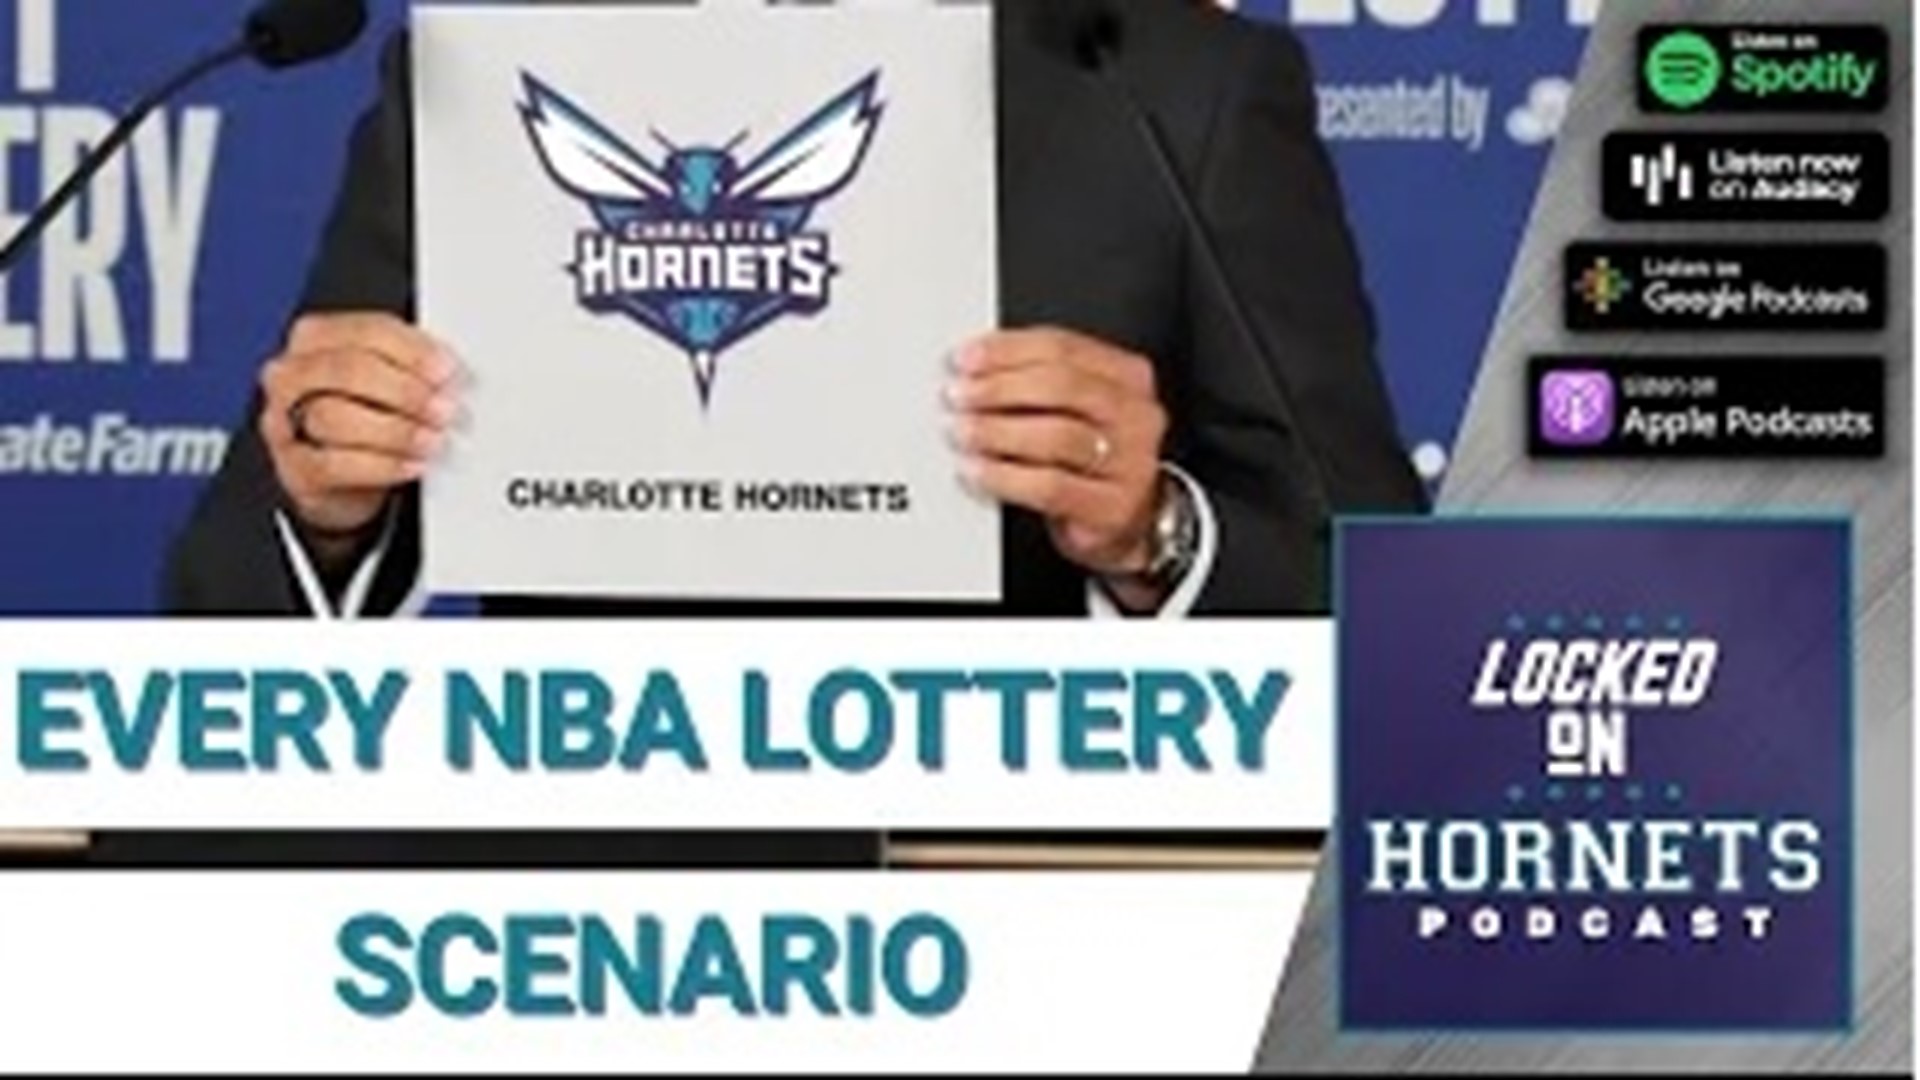 The Hornets are on the verge of finding out their NBA draft fate. Despite low odds, hope is alive they can turn a 13th position into a top 4 pick.